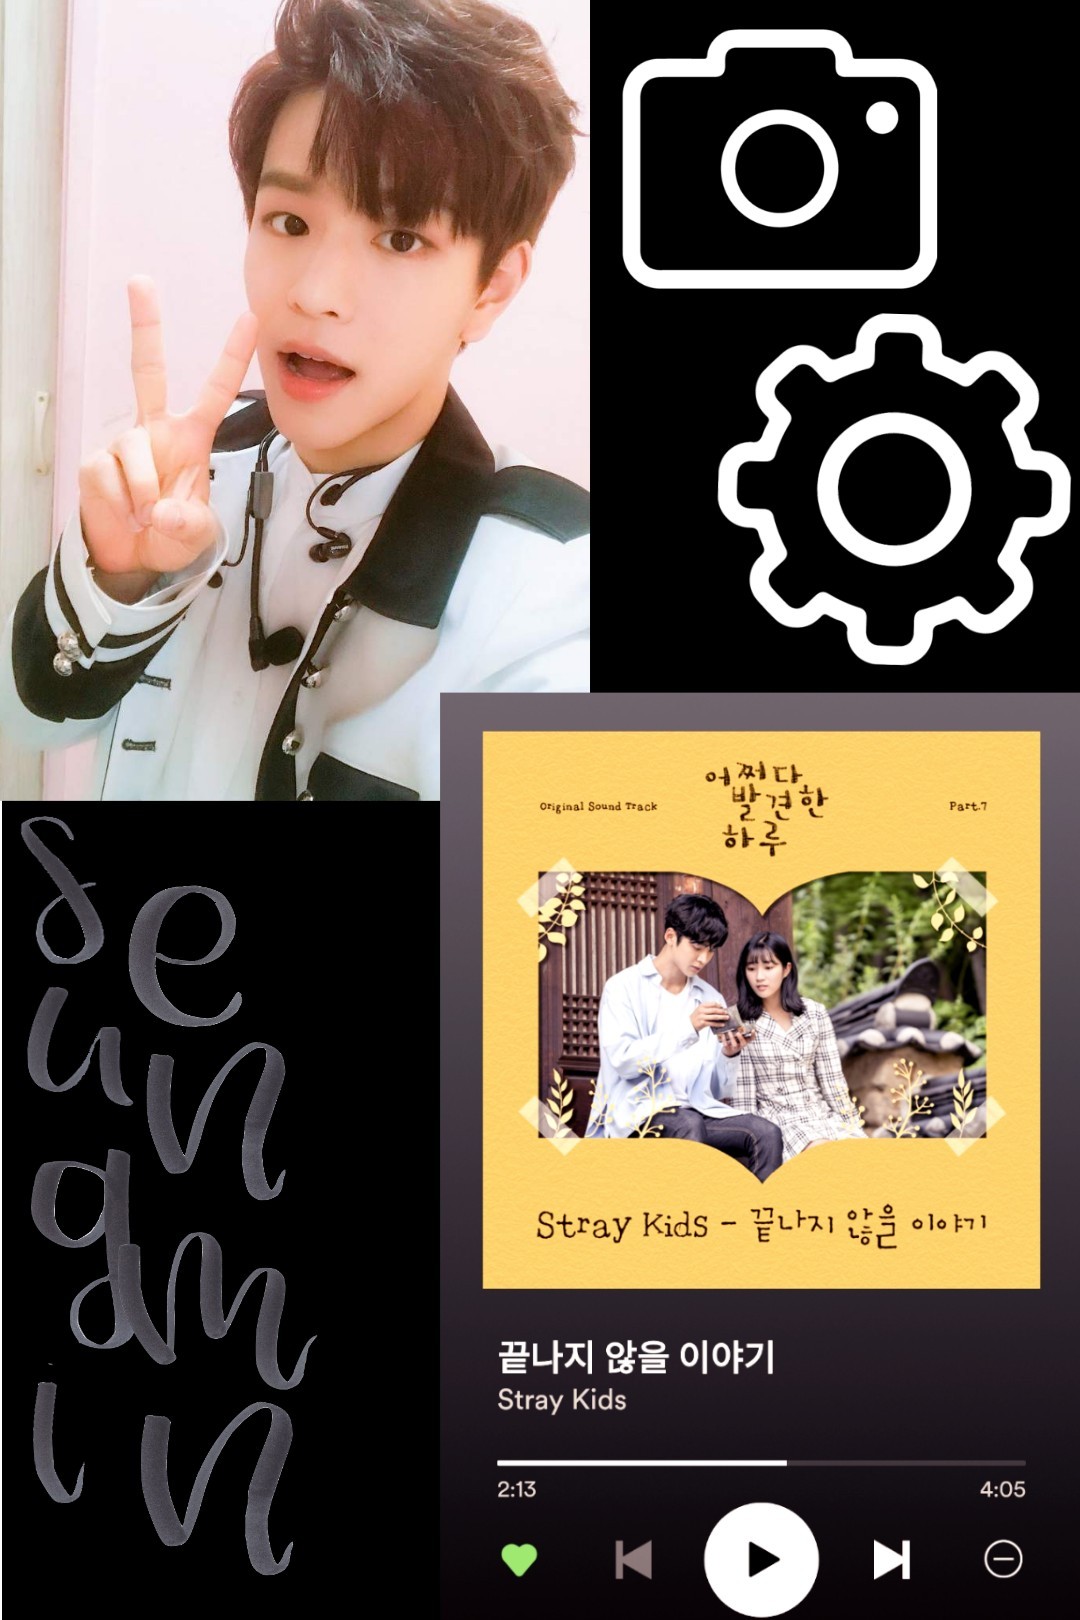 And Seungmin for Stray Kids, tomorrow I make the membres of BTS ! 